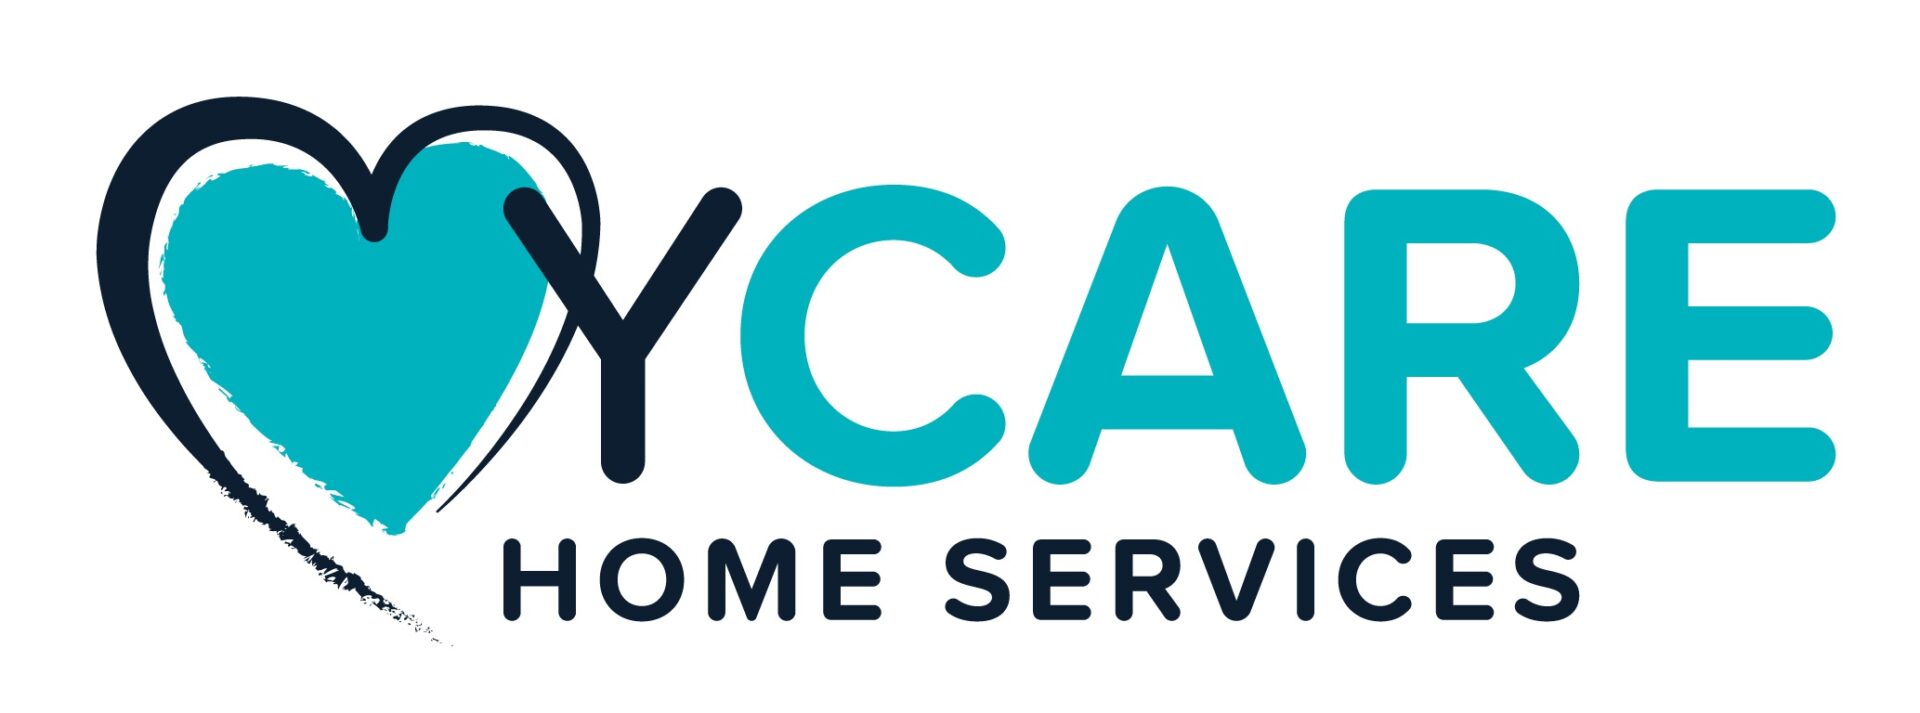 A logo of the city care home services company.